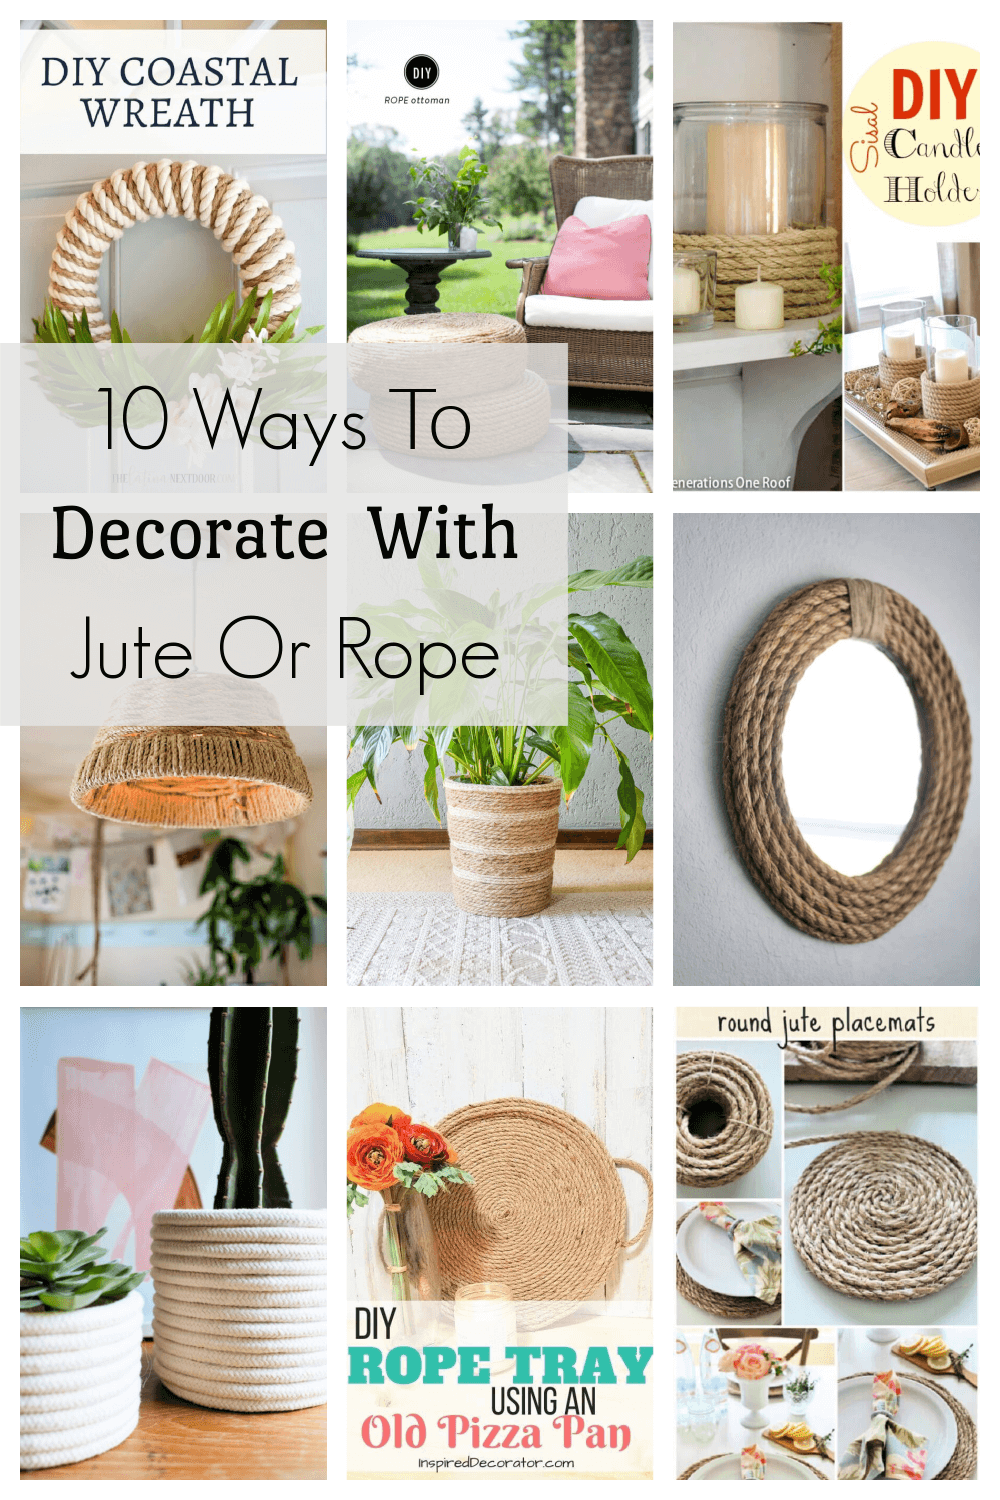 10 Ways To Decorate With Jute Or Rope · Cozy Little House